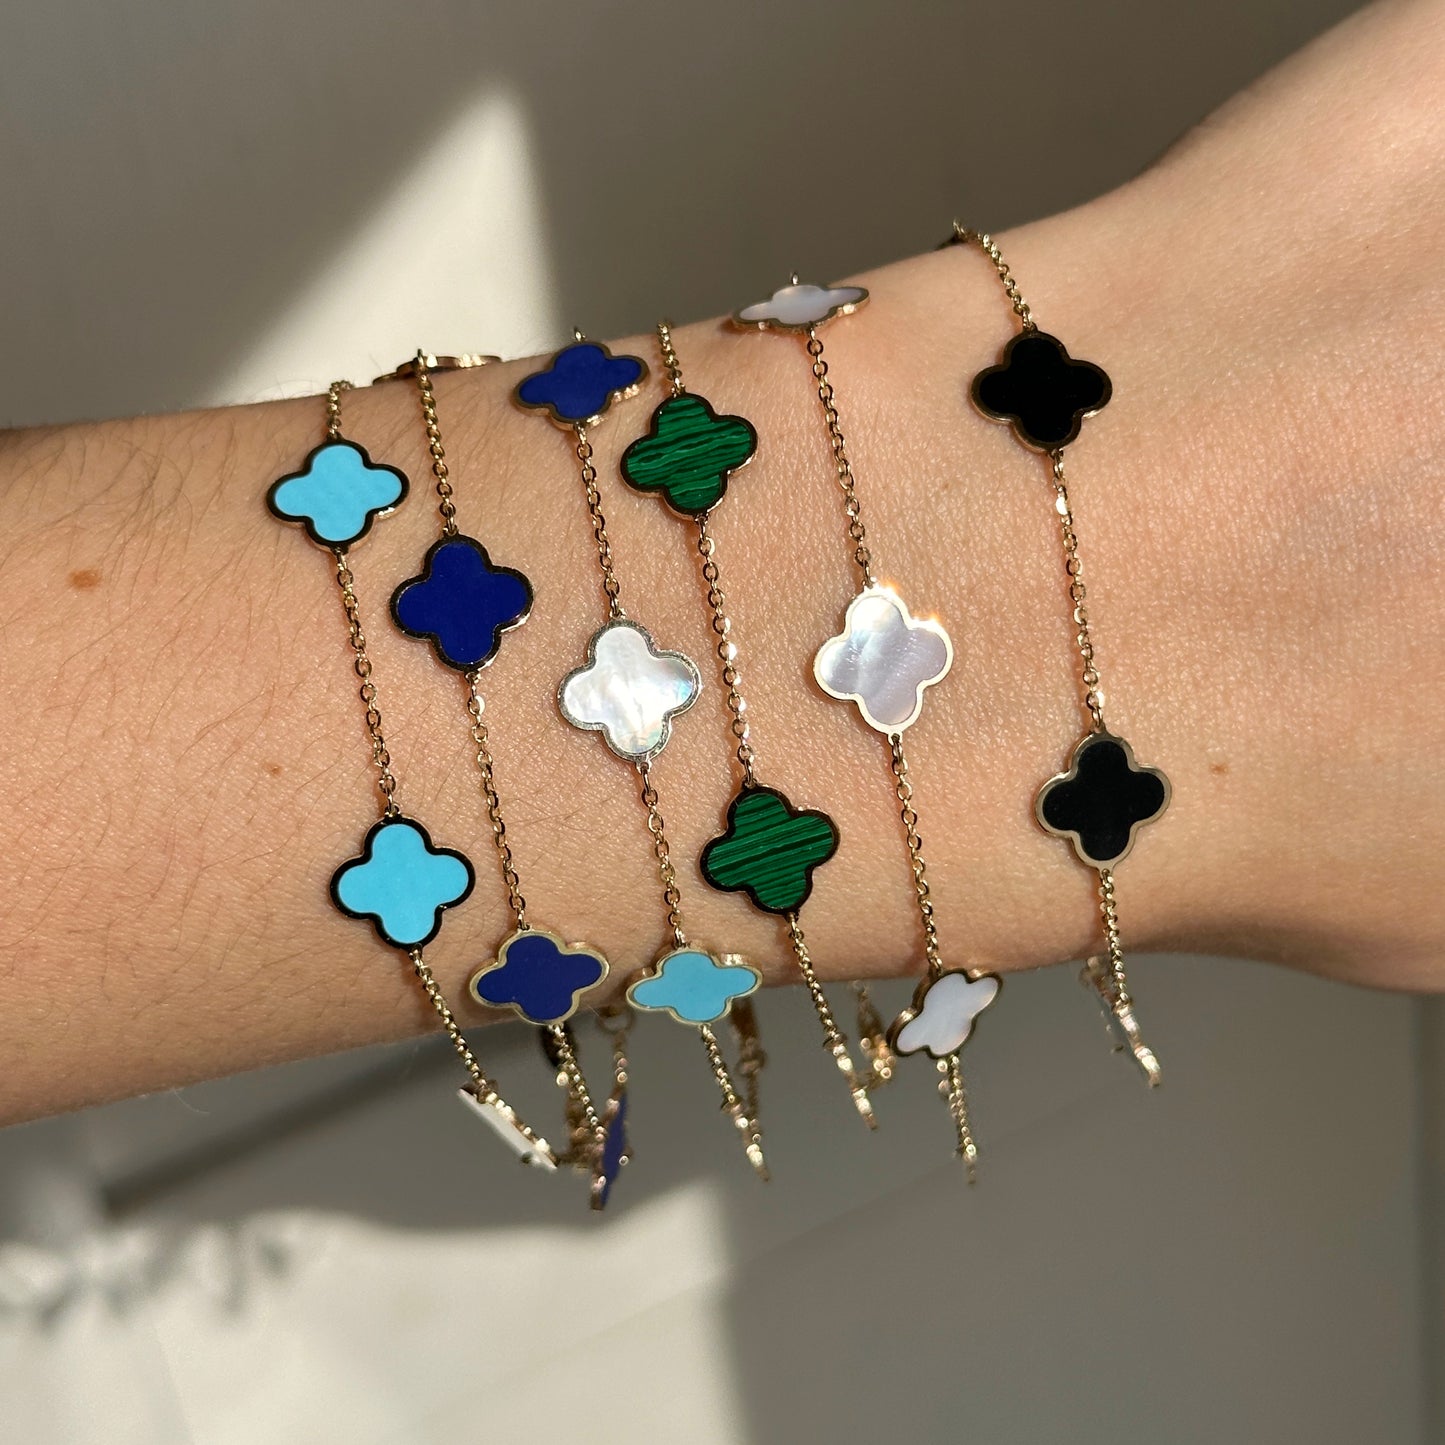 14KT Yellow Gold Lapis, Turquoise + Pearl 4 Leaf Cover Charm Chain Bracelet